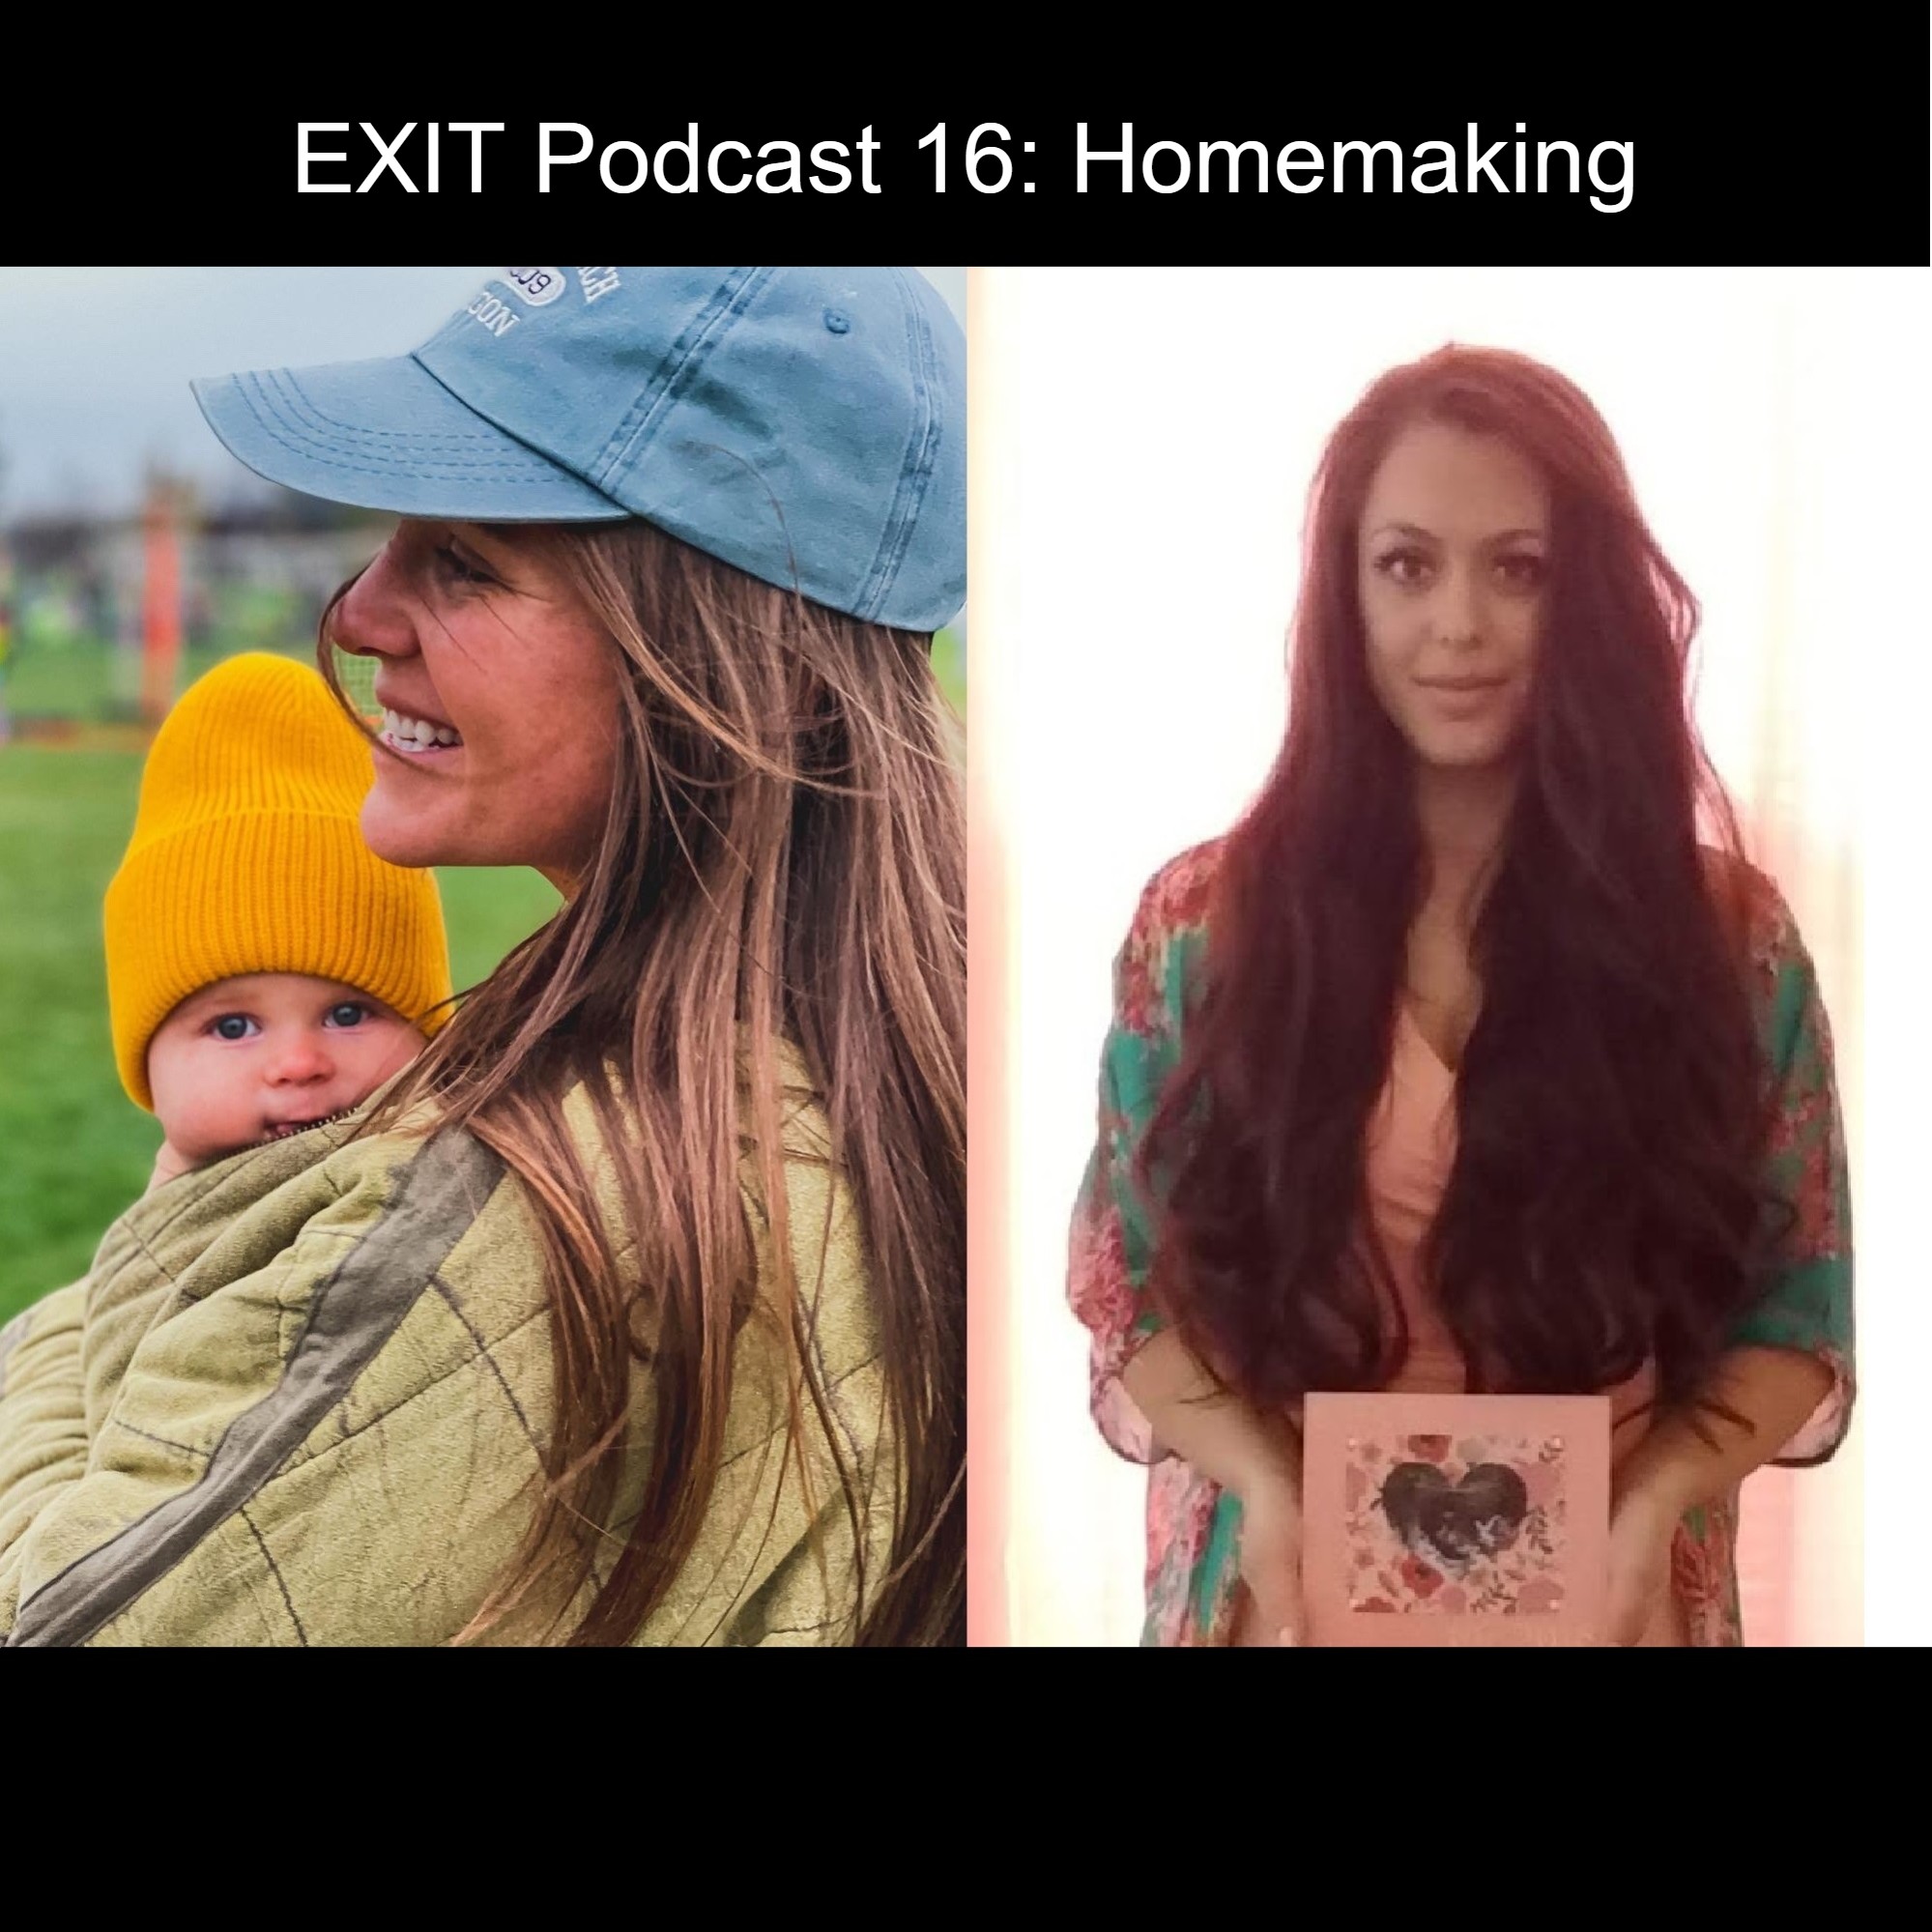 EXIT Podcast Episode 16: Homemaking